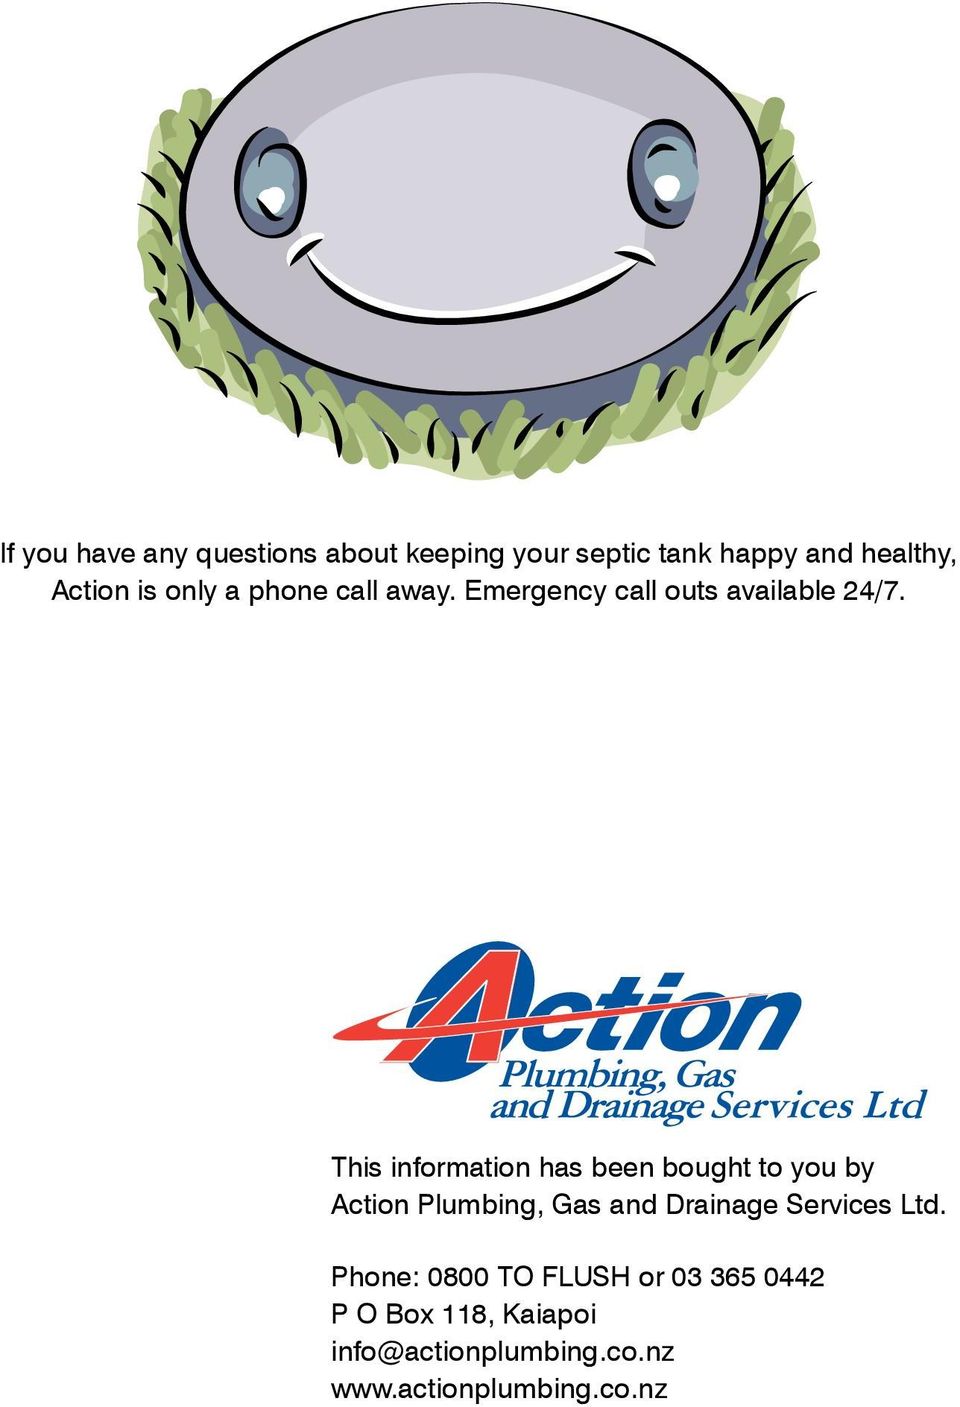 This information has been bought to you by Action Plumbing, Gas and Drainage Services Ltd.